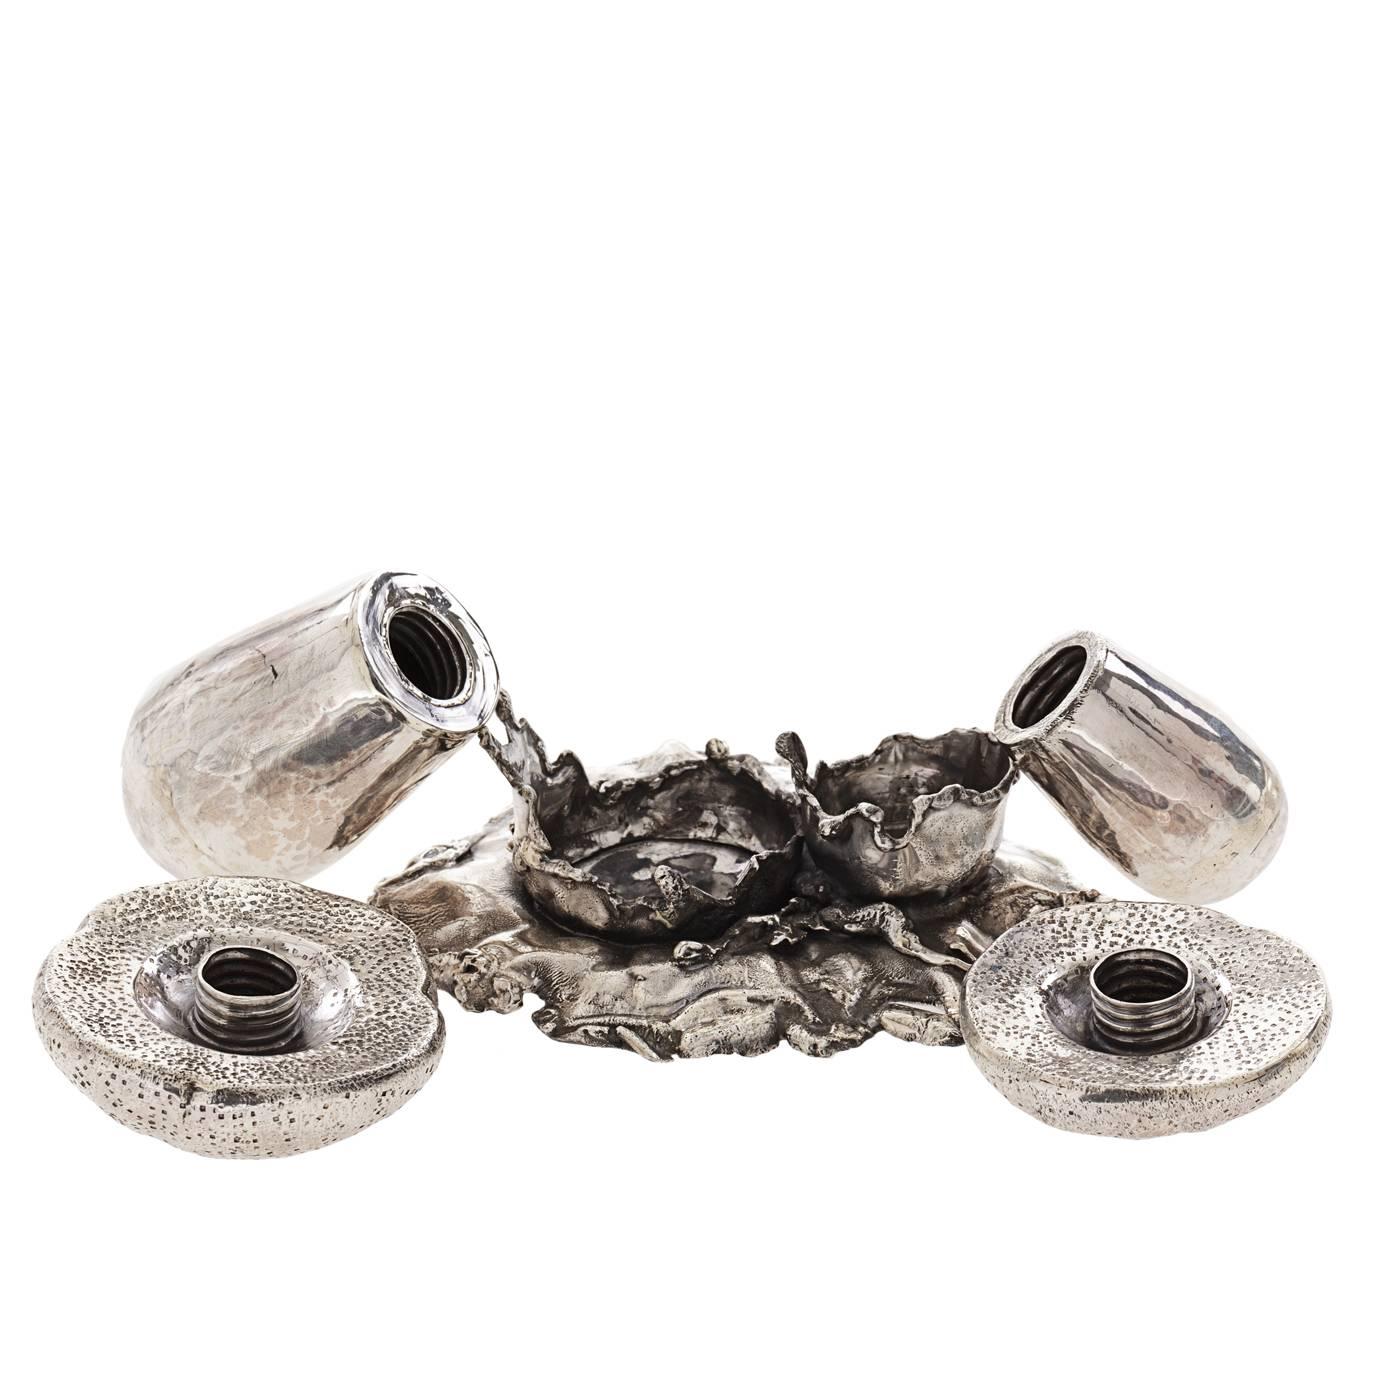 Italian Mushroom Sterling Silver Salt and Pepper Cellar - Set of 4 Pieces for William